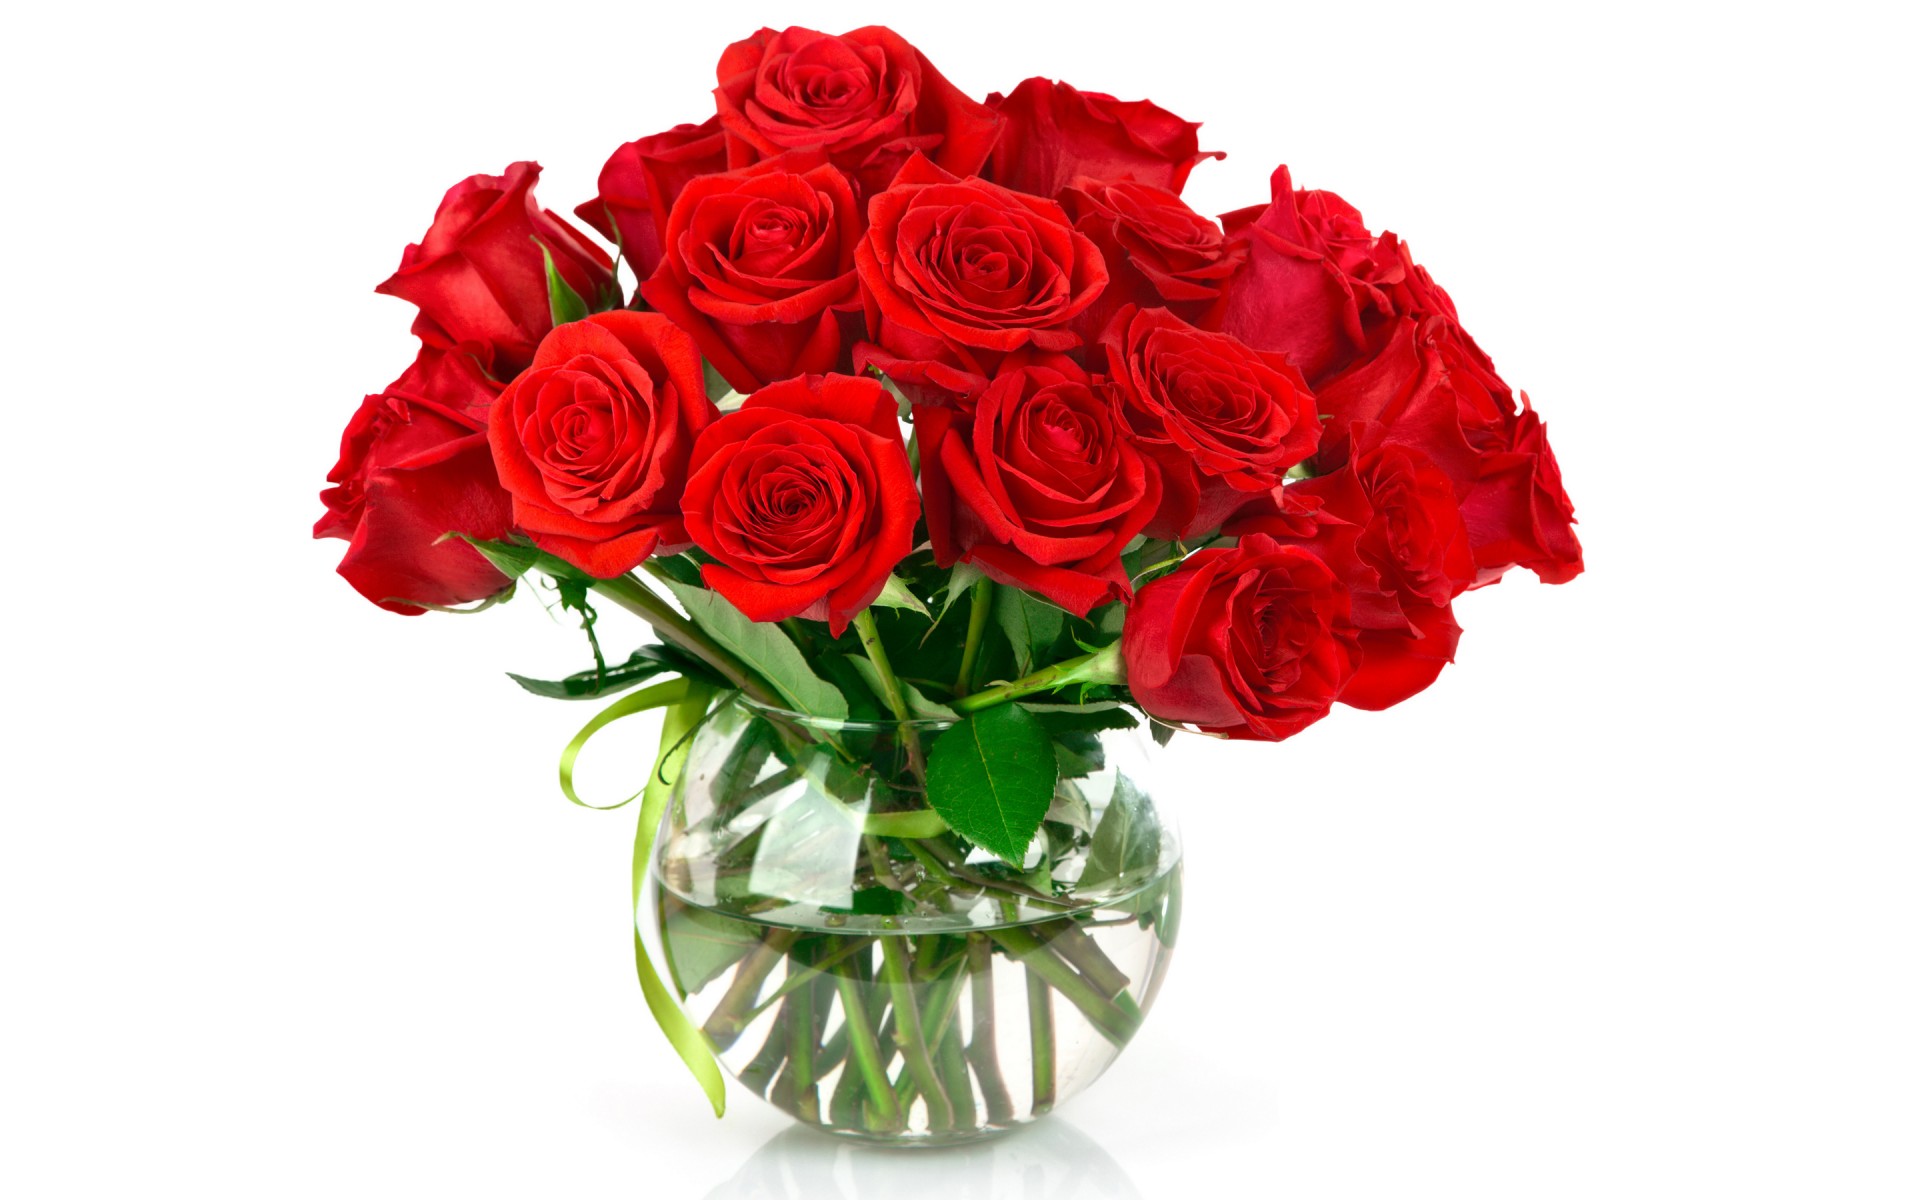 bouquet, Red, Roses, Pot, Water, Flowers Wallpaper